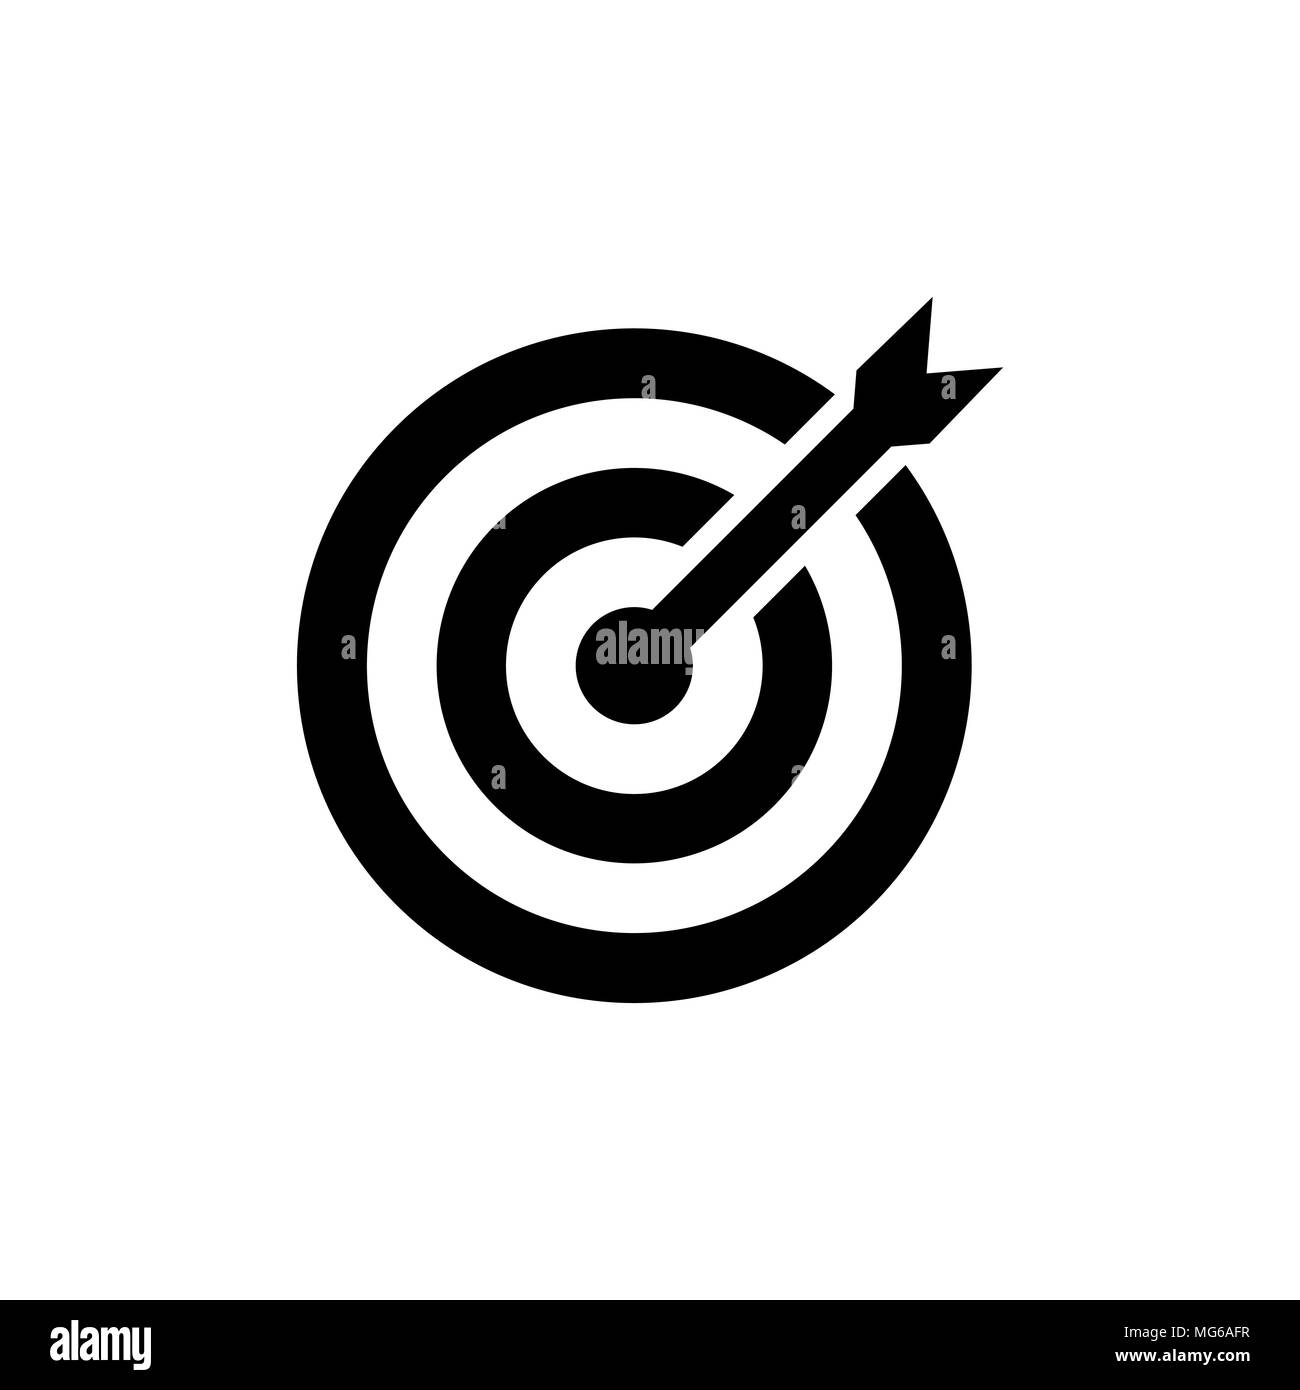 Target Icon in flat style. Aim symbol isolated on white background. Simple abstract drawing icon in black. Vector illustration for graphic design, Web Stock Vector